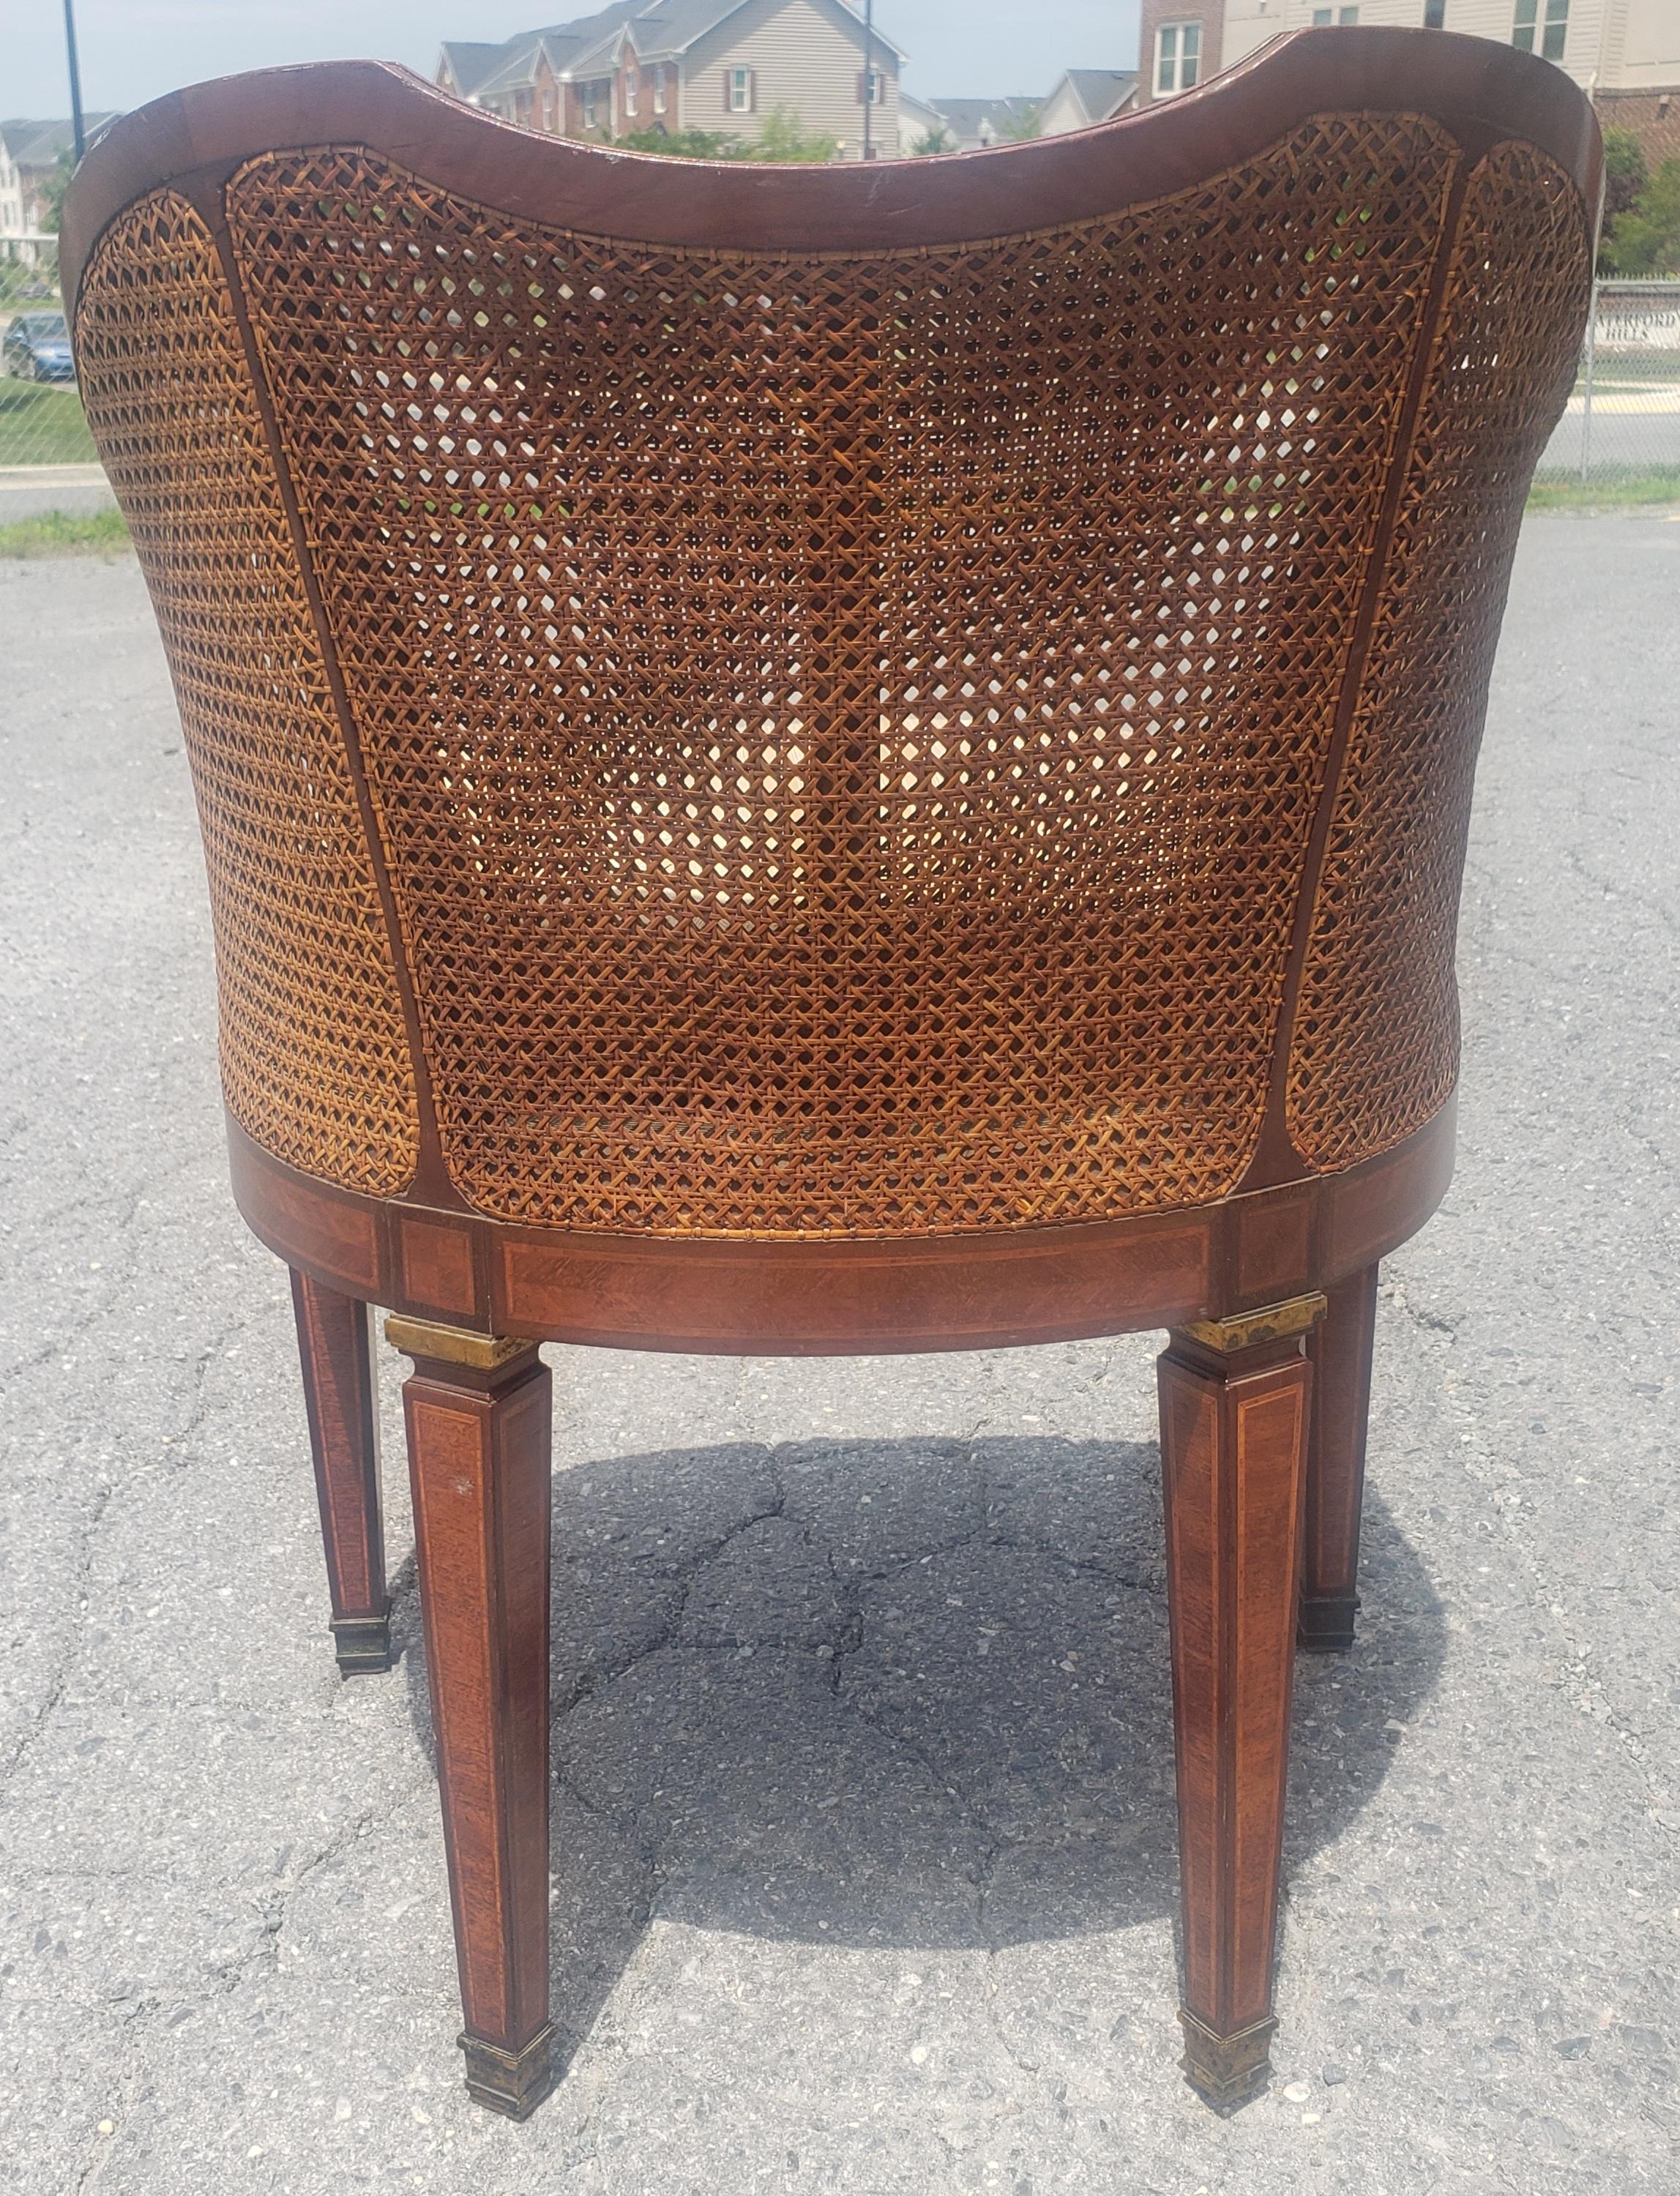 19th Century Louis XV Transitional Mahogany and Kingwood Marquetry Burl and Cane Barrel Chair For Sale